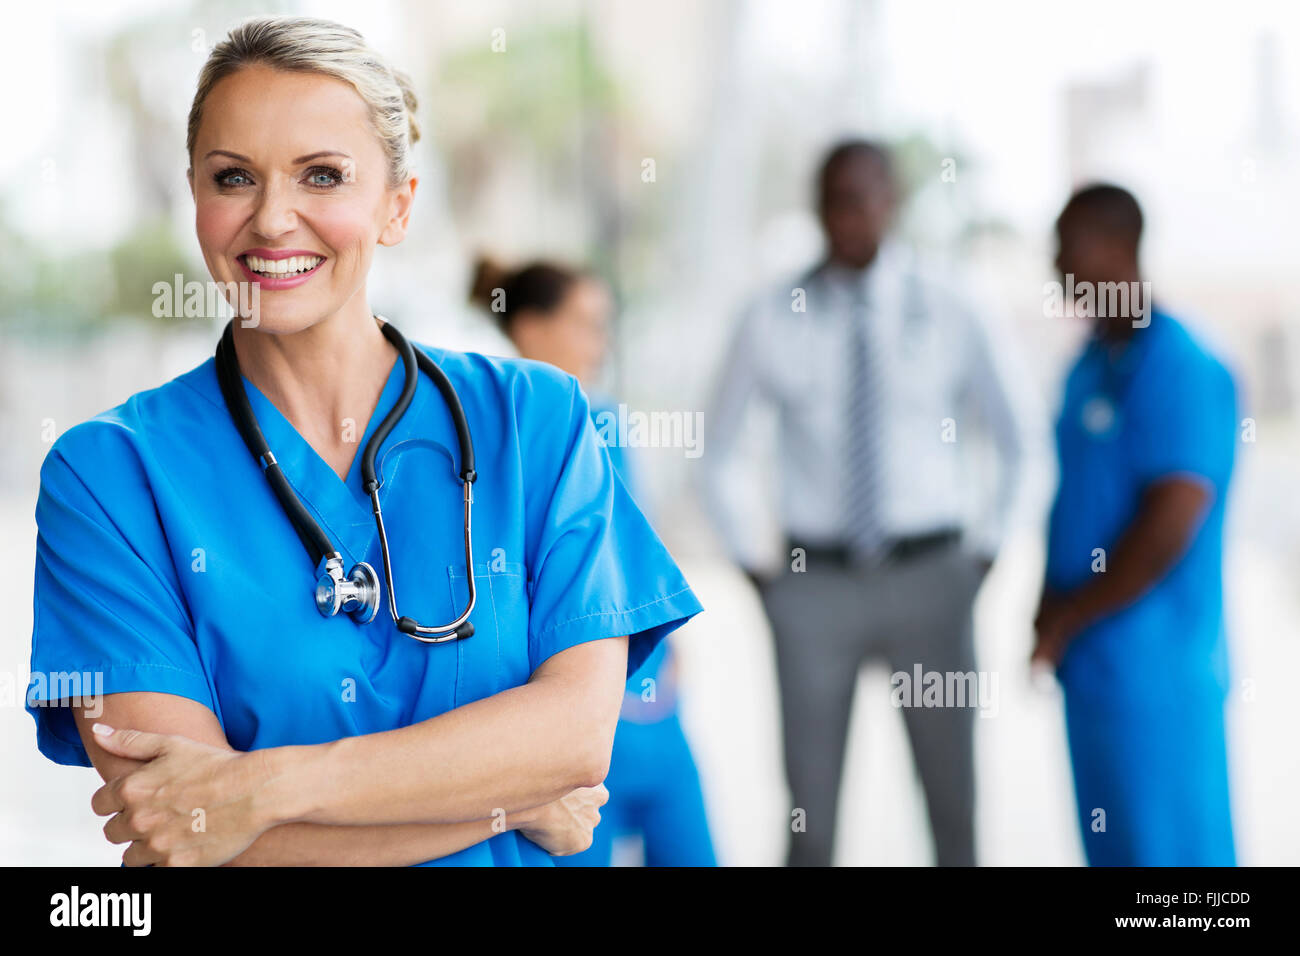 confident mid age medical doctor in hospital Stock Photo